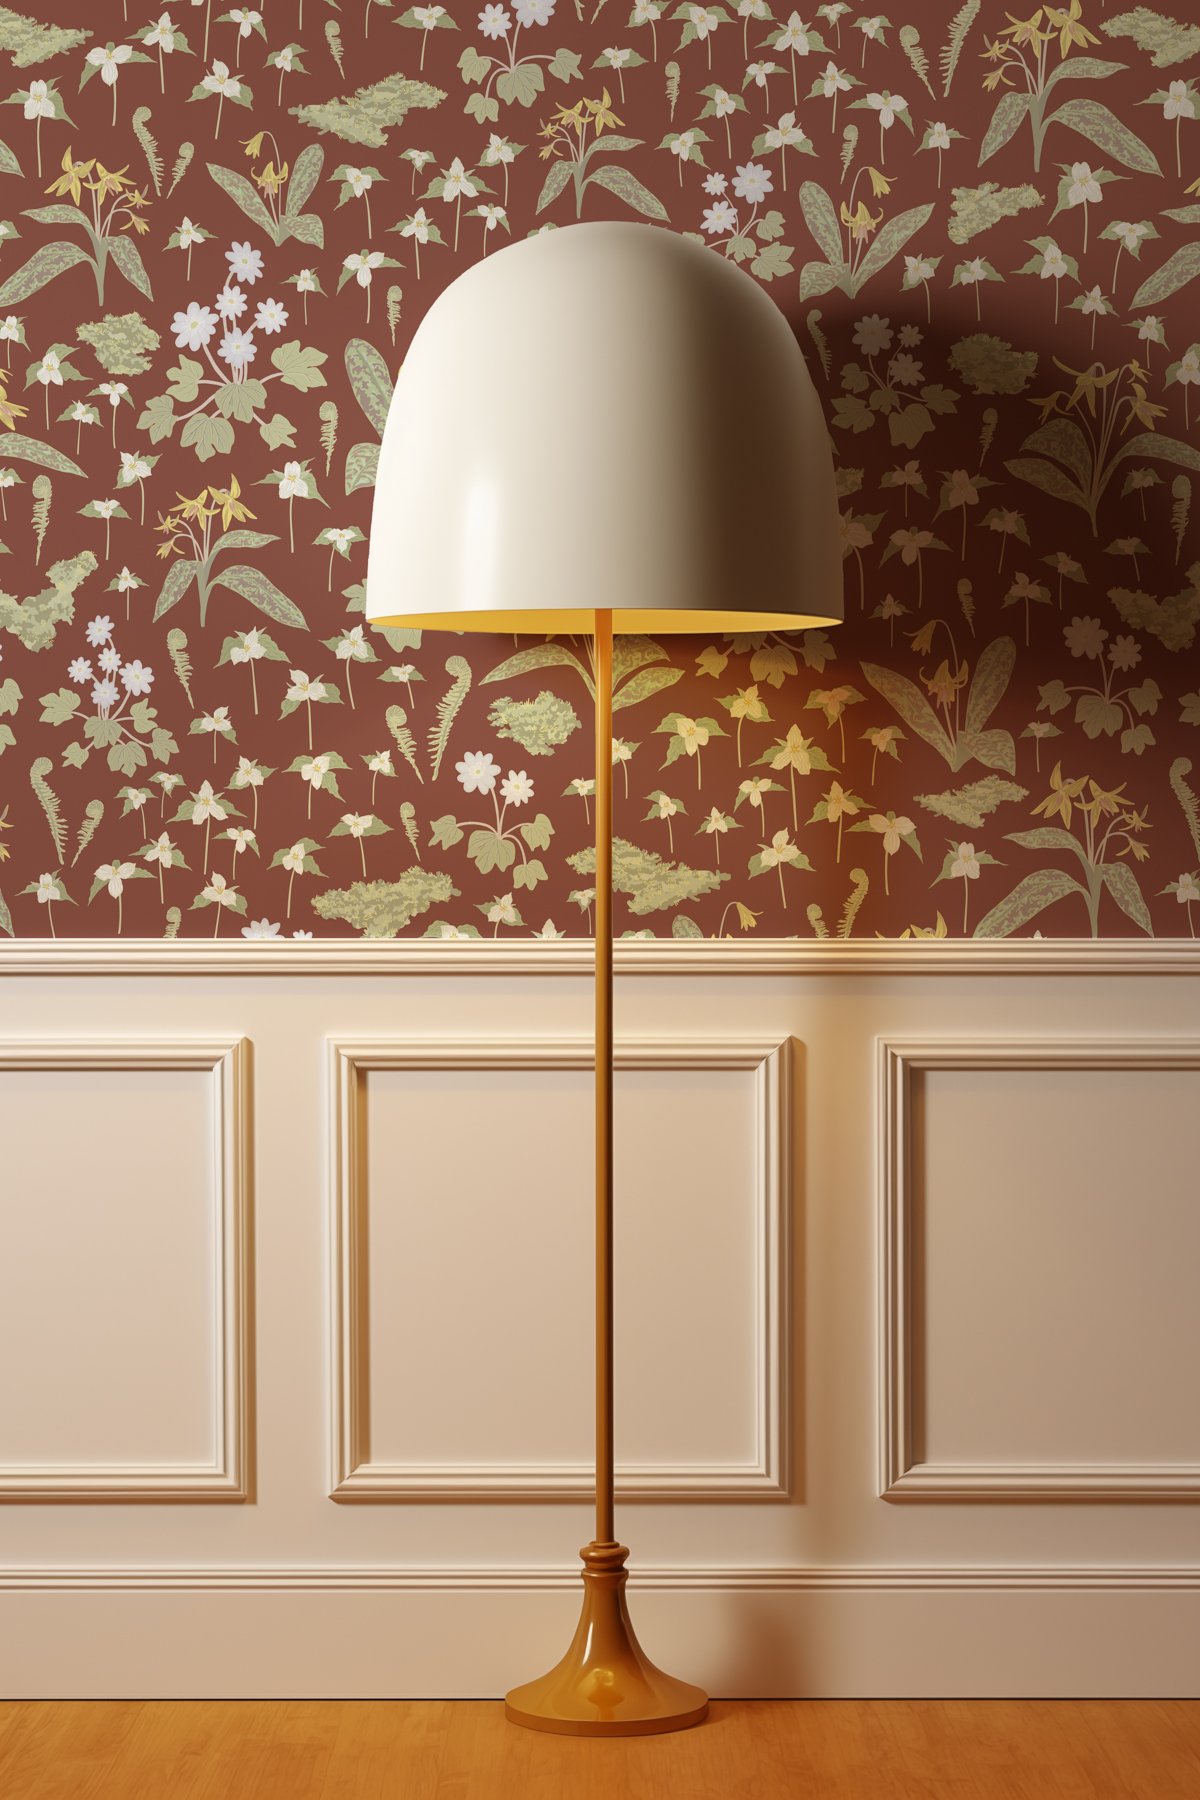 Kate Golding Forest Blooms (Oxblood) Wallpaper.  Modern wallcoverings and interior decor.  